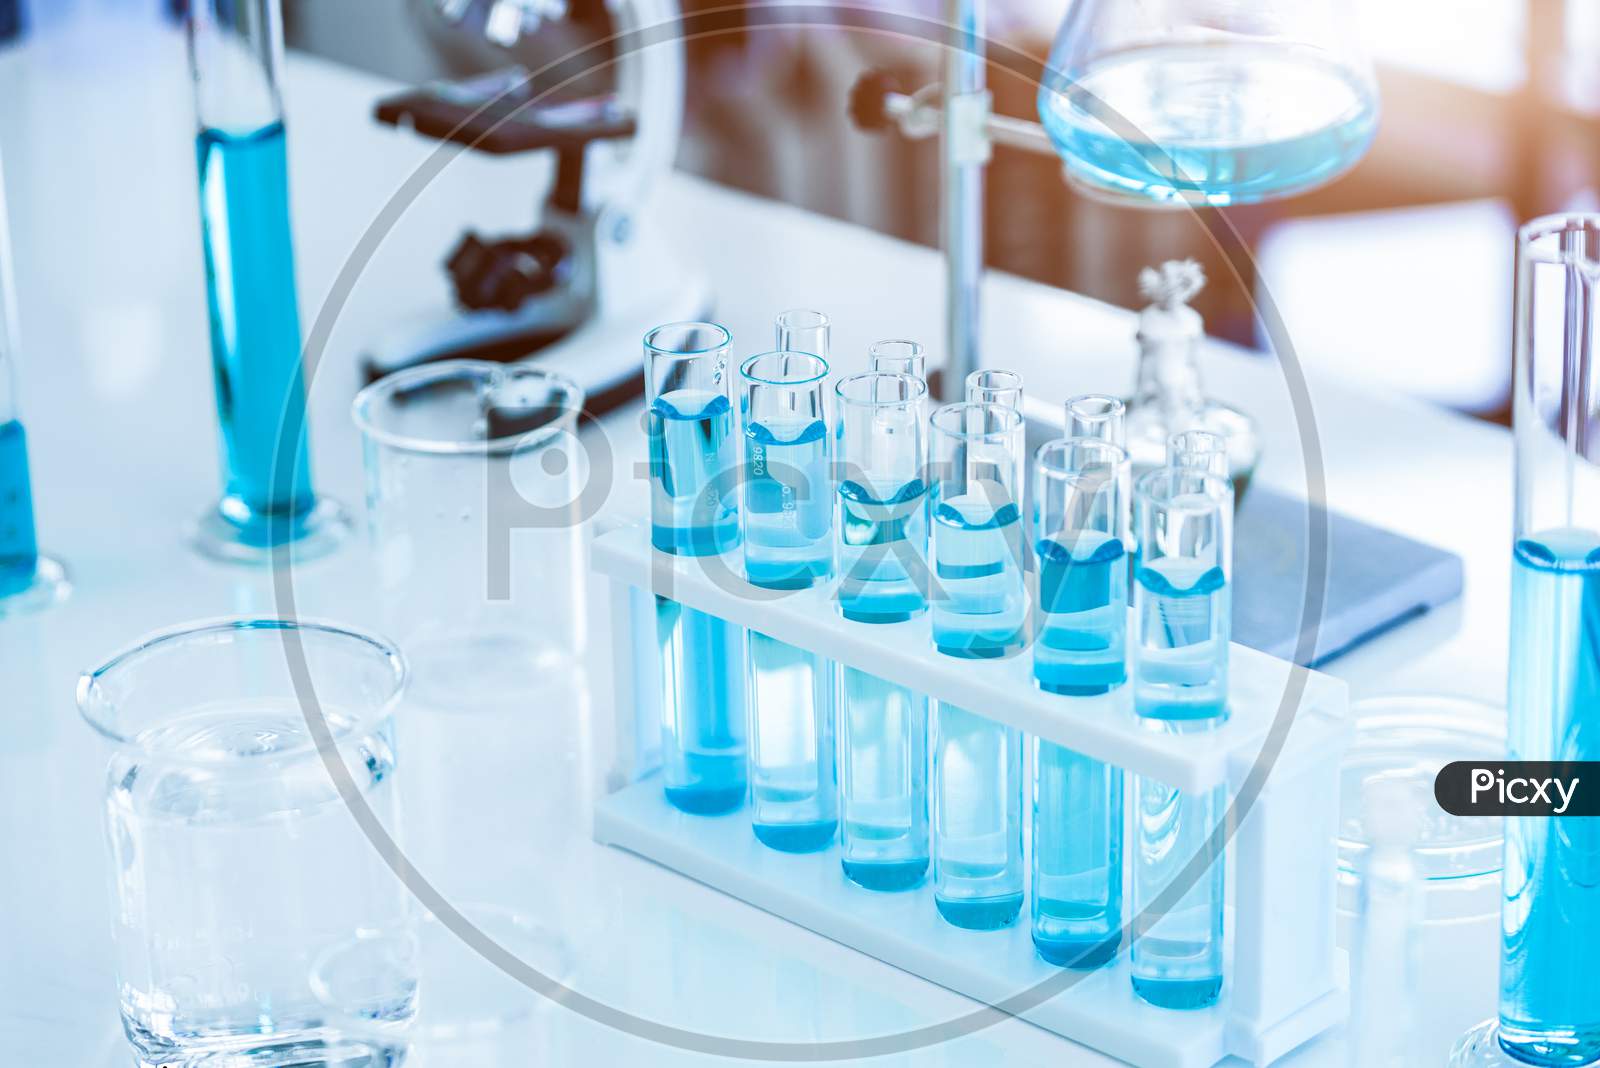 Laboratory Test Tubes And Solution With Stethoscope Background. Science And Medical Concept. Scientist Research And Analysis Biotechnology Concept